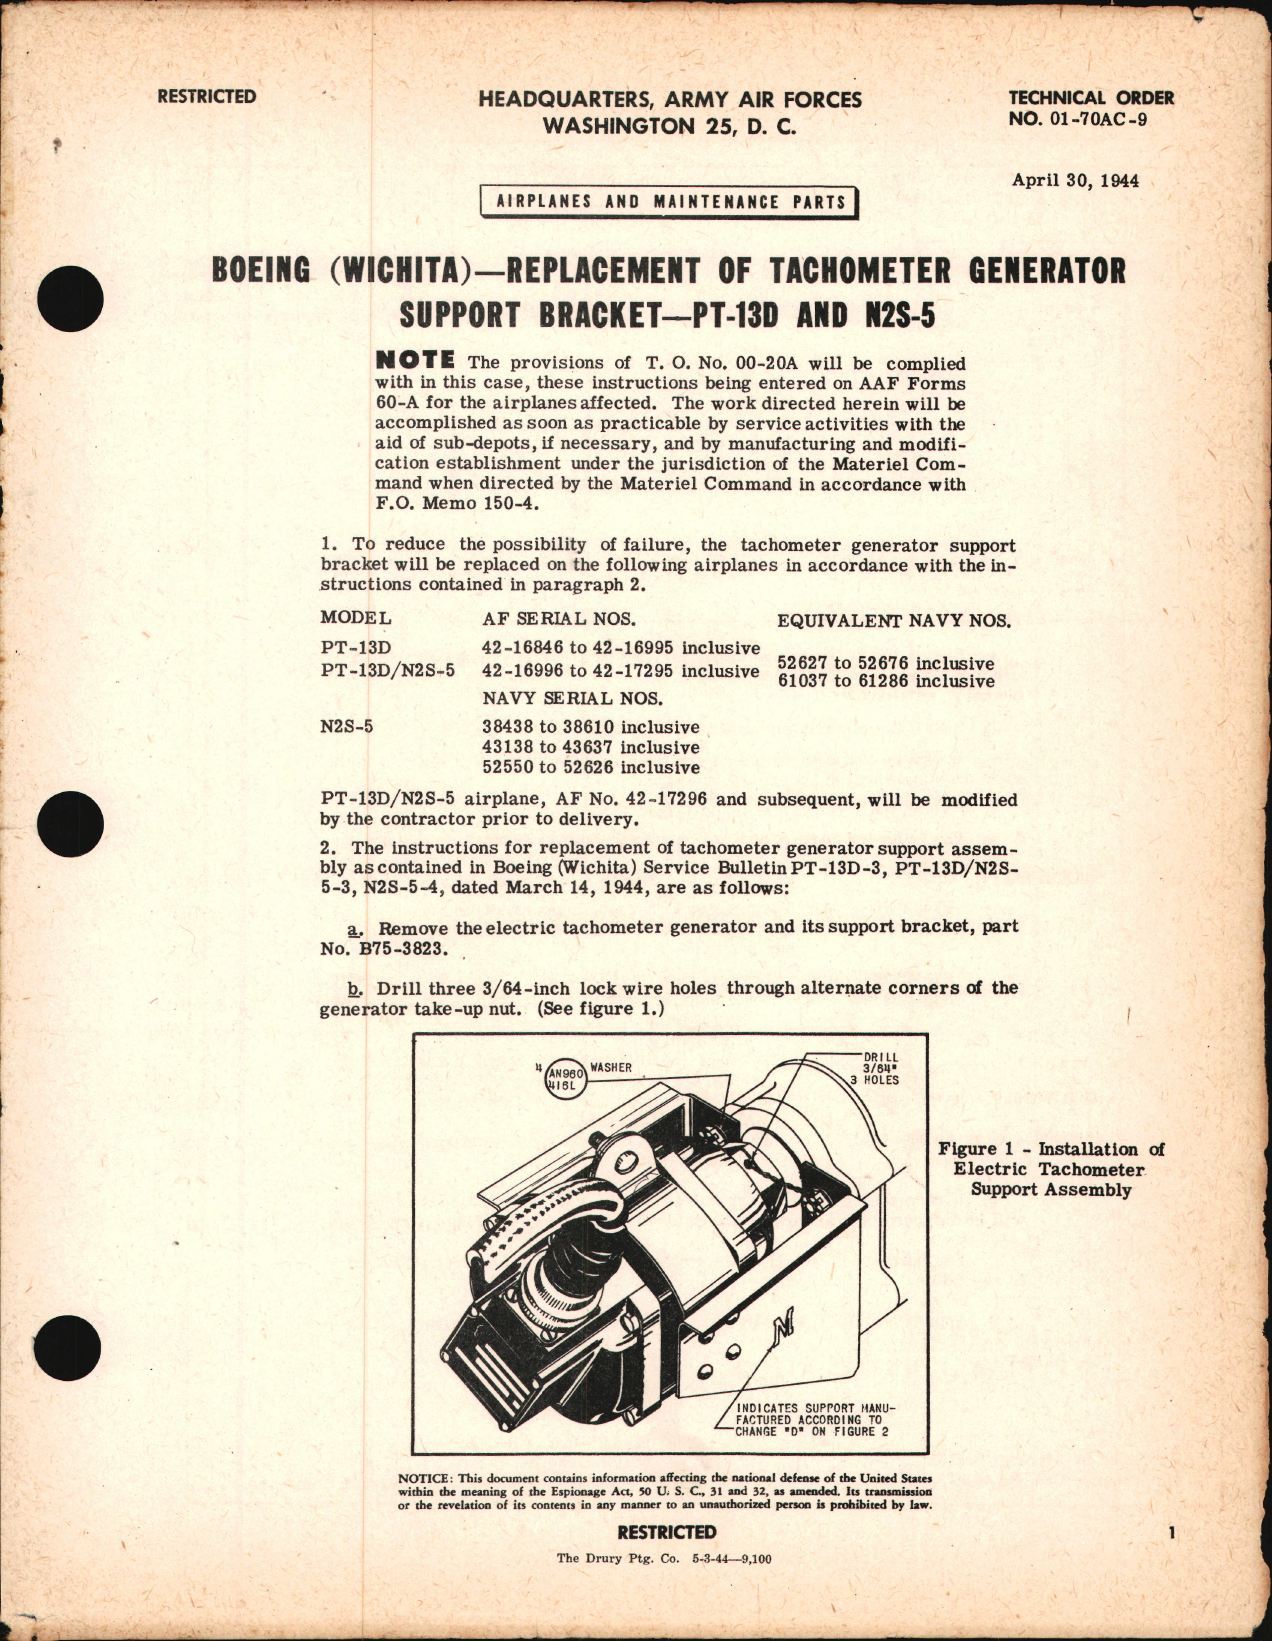 Sample page 1 from AirCorps Library document: Replacement of Tachometer Generator Support Bracket for PT-13D & N2S-5